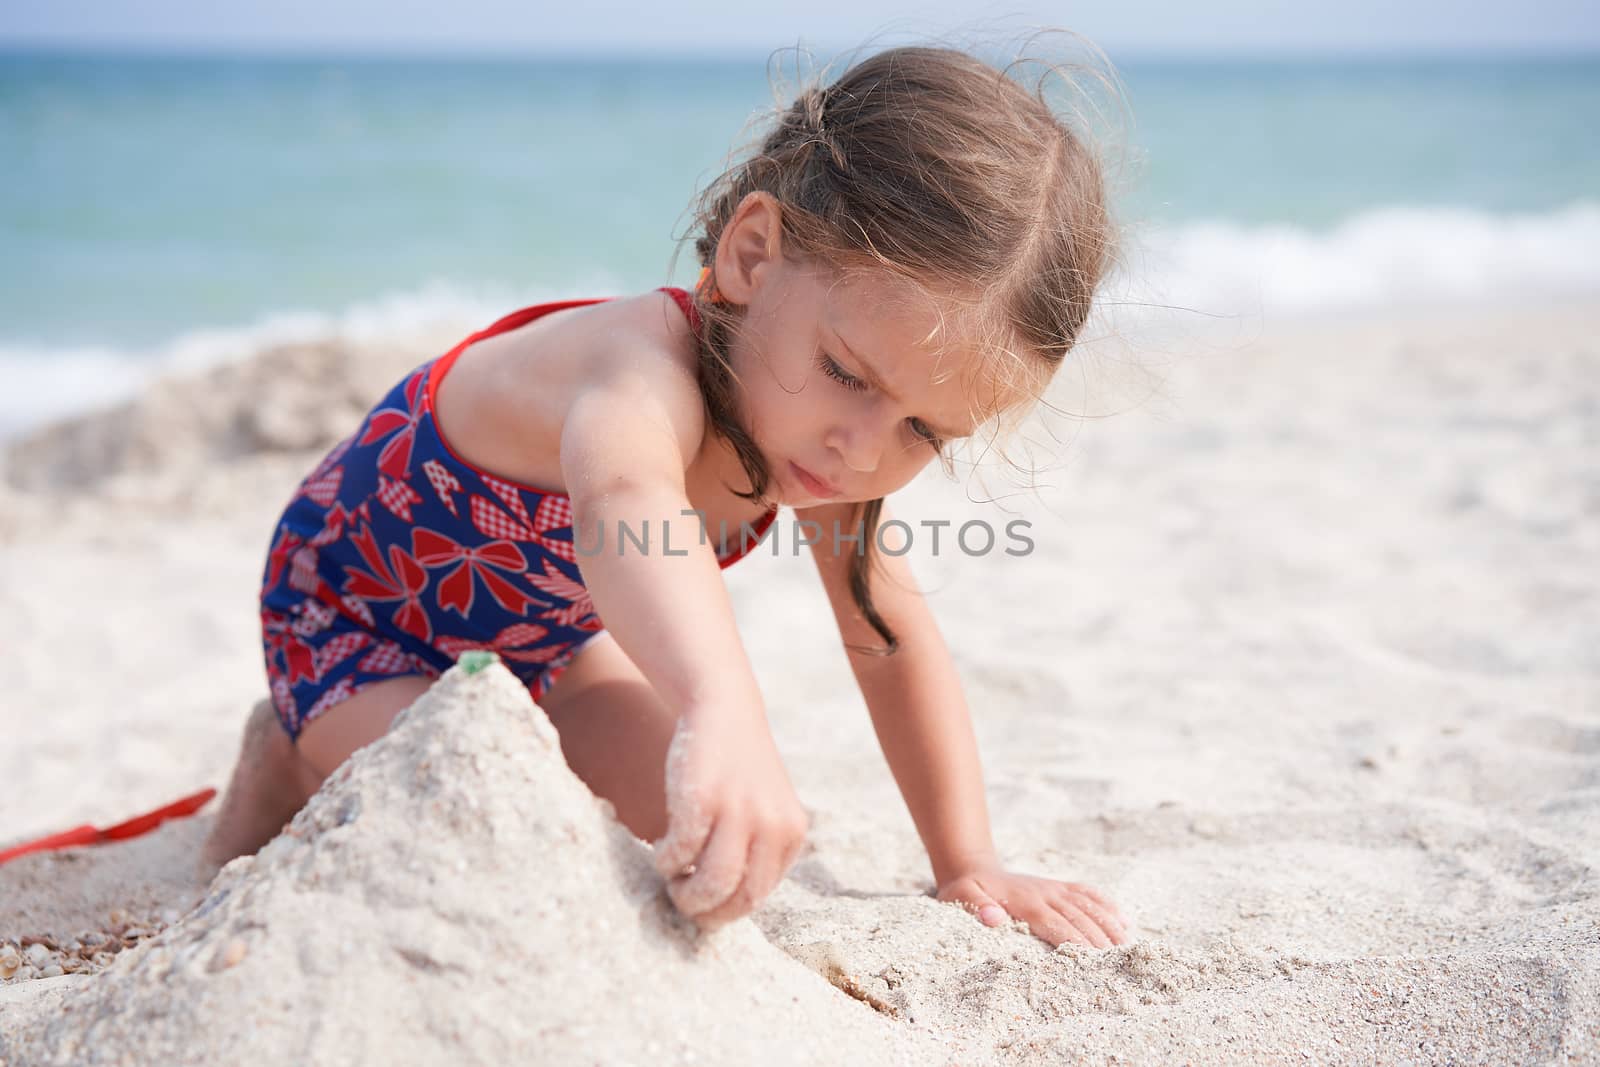 Child playing sand beach Little girl play sad alone summer family vacation by andreonegin